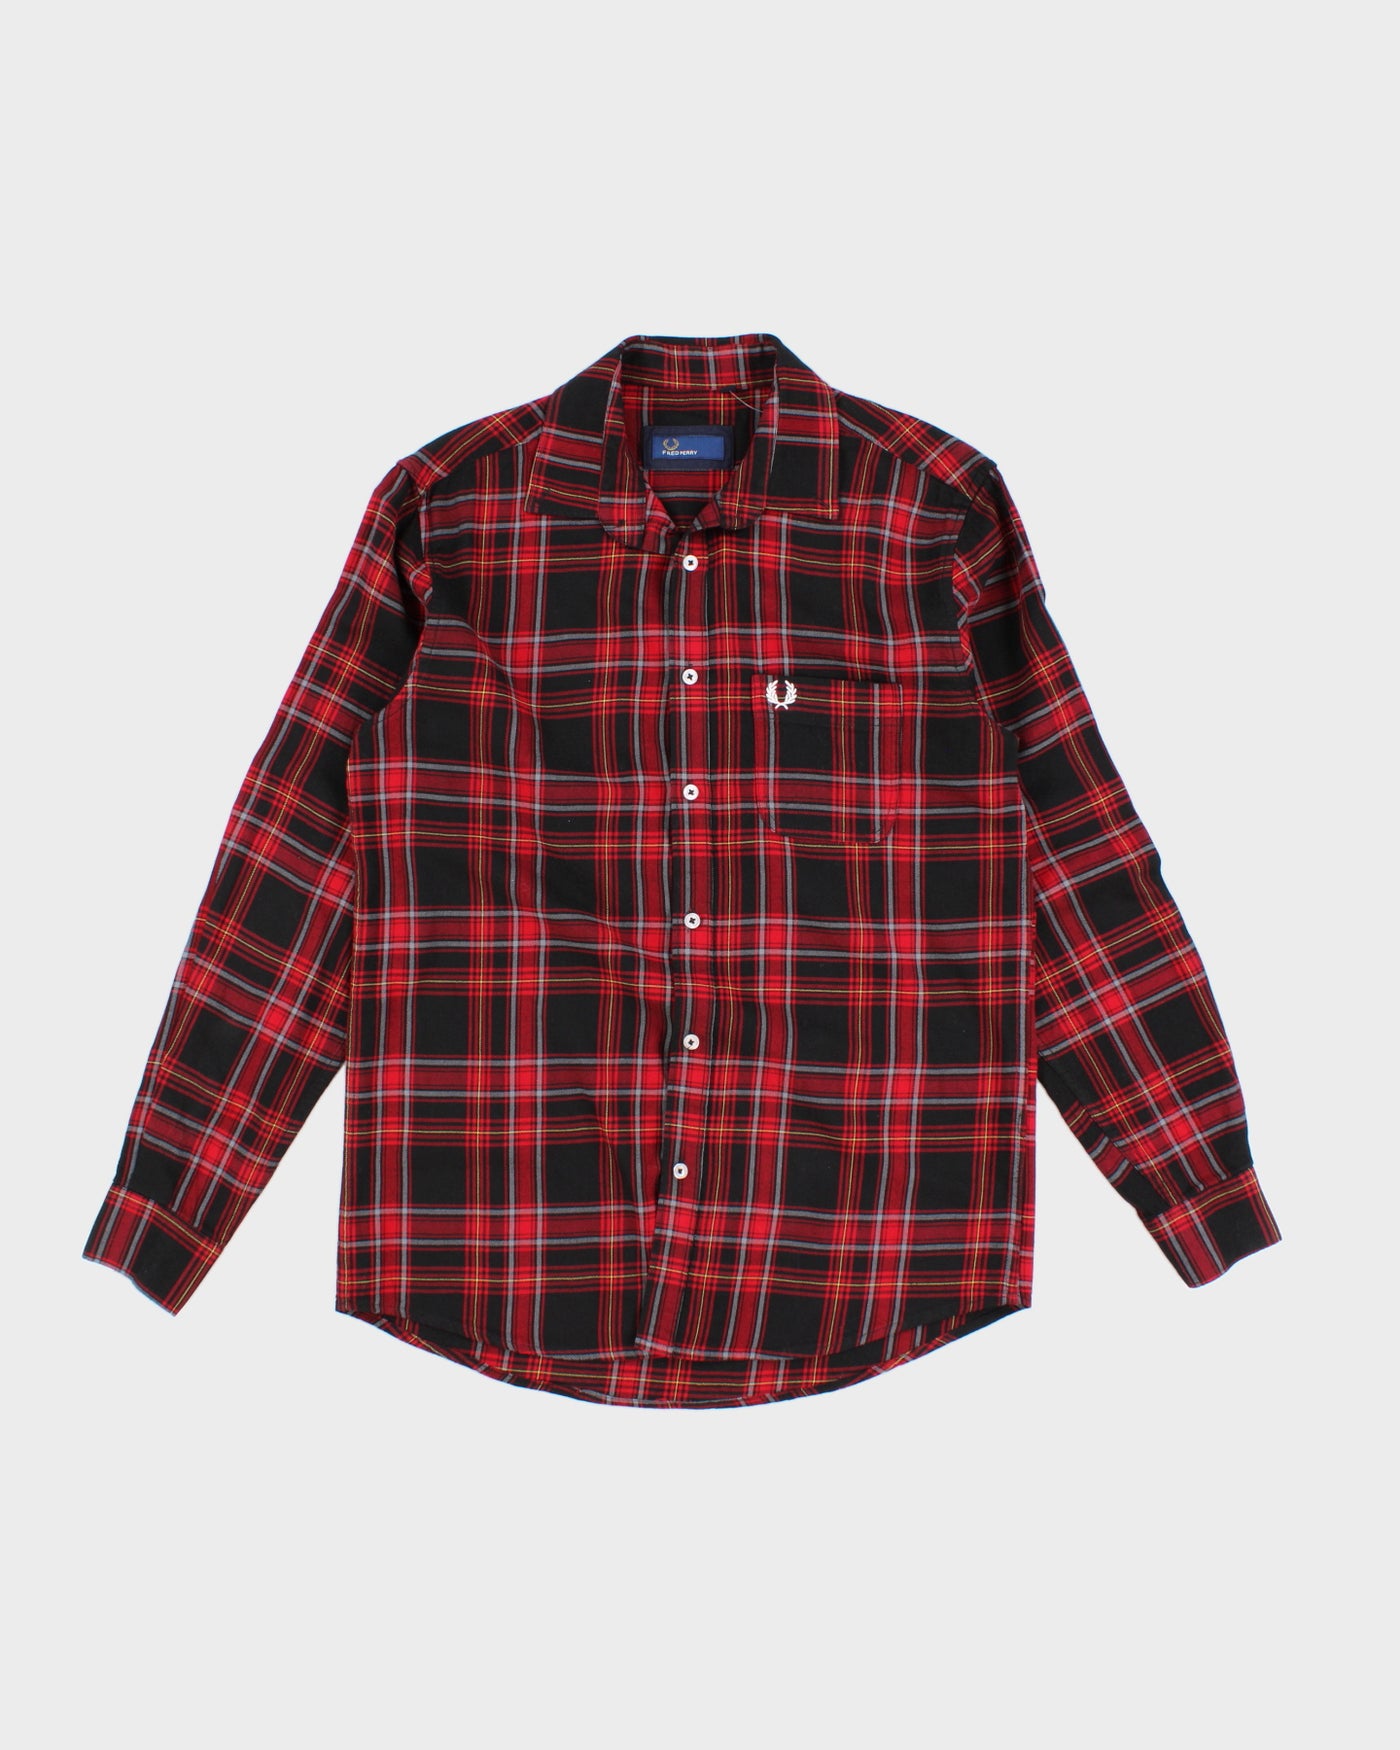 Fred Perry Red Check Long Sleeve Shirt - L/XL